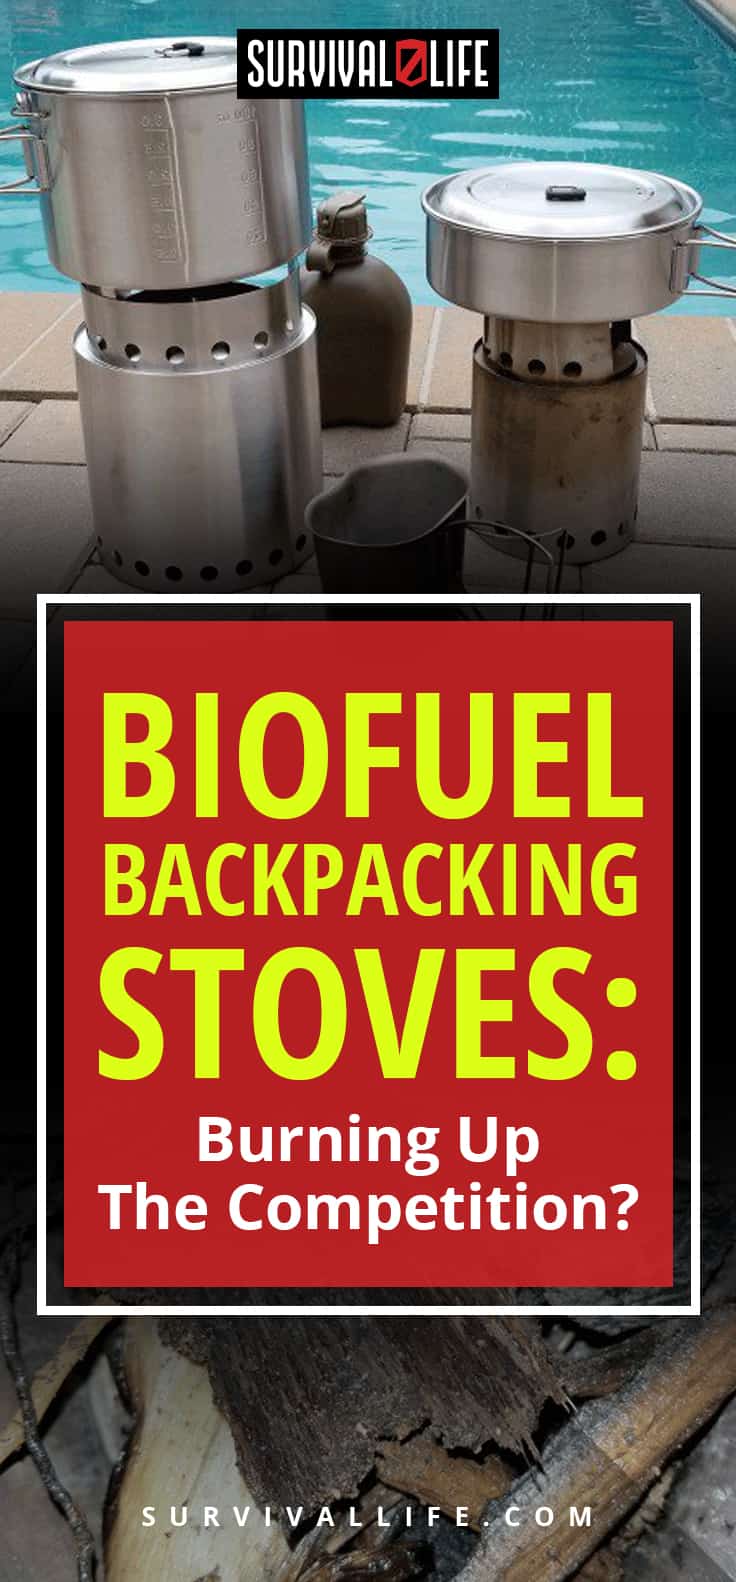 Biofuel Backpacking Stoves: Burning Up The Competition?